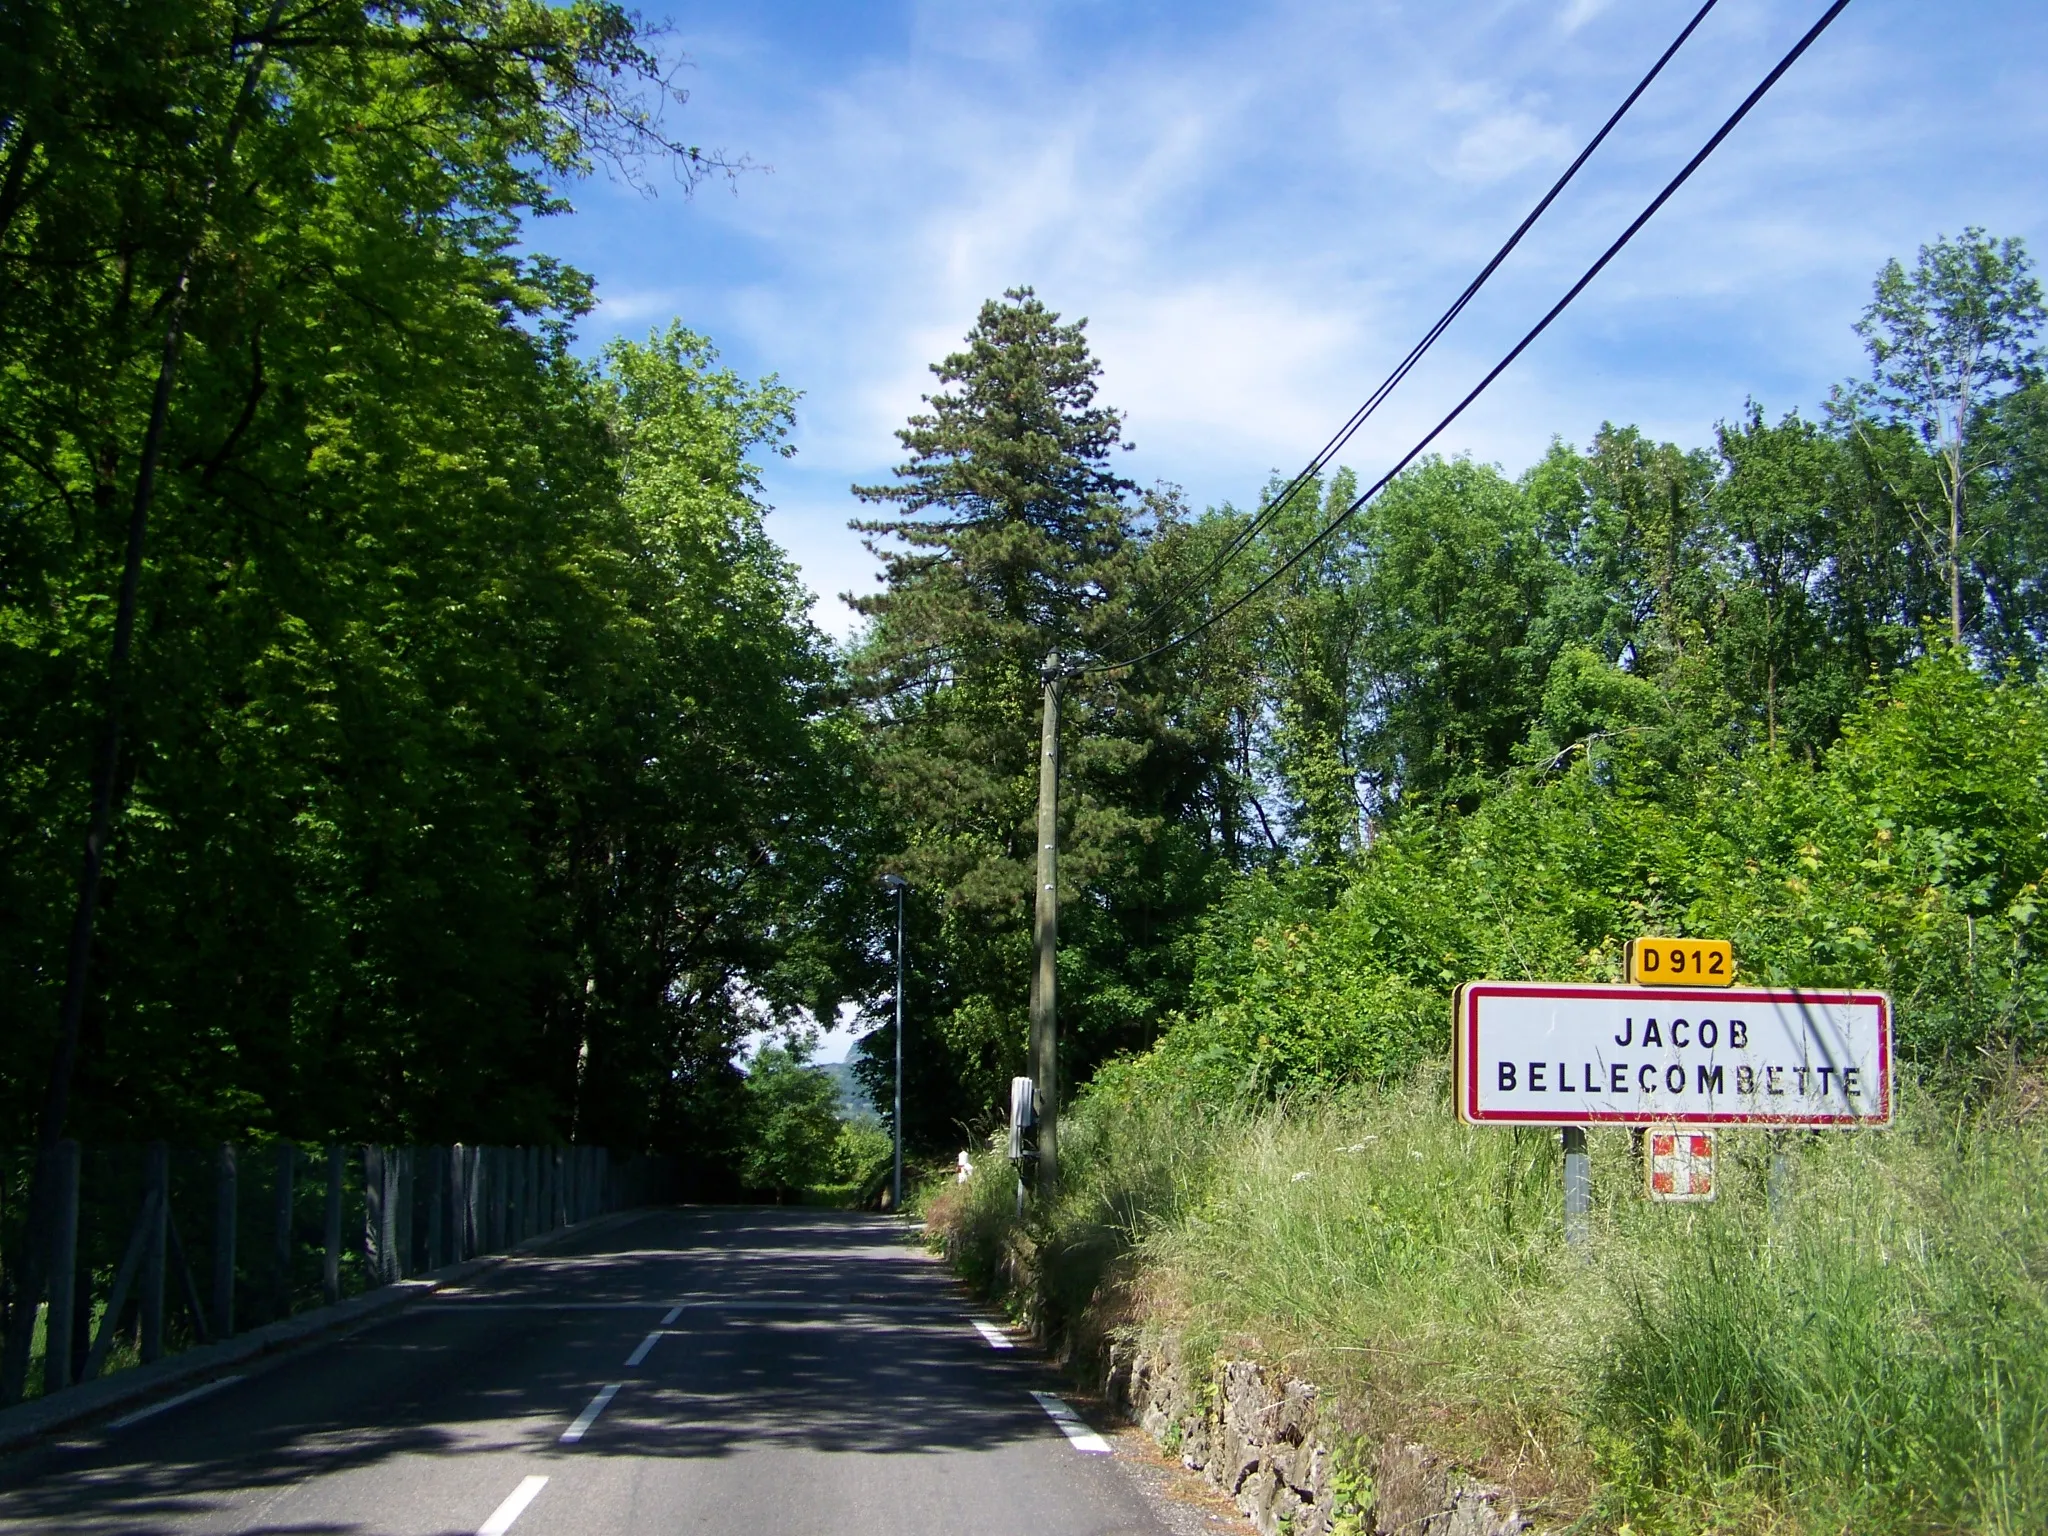 Photo showing: Sight of the RD 912 previous RN 512) road entering into the French commune of Jacob-Bellecombette, last town before Chambéry, in Savoie.